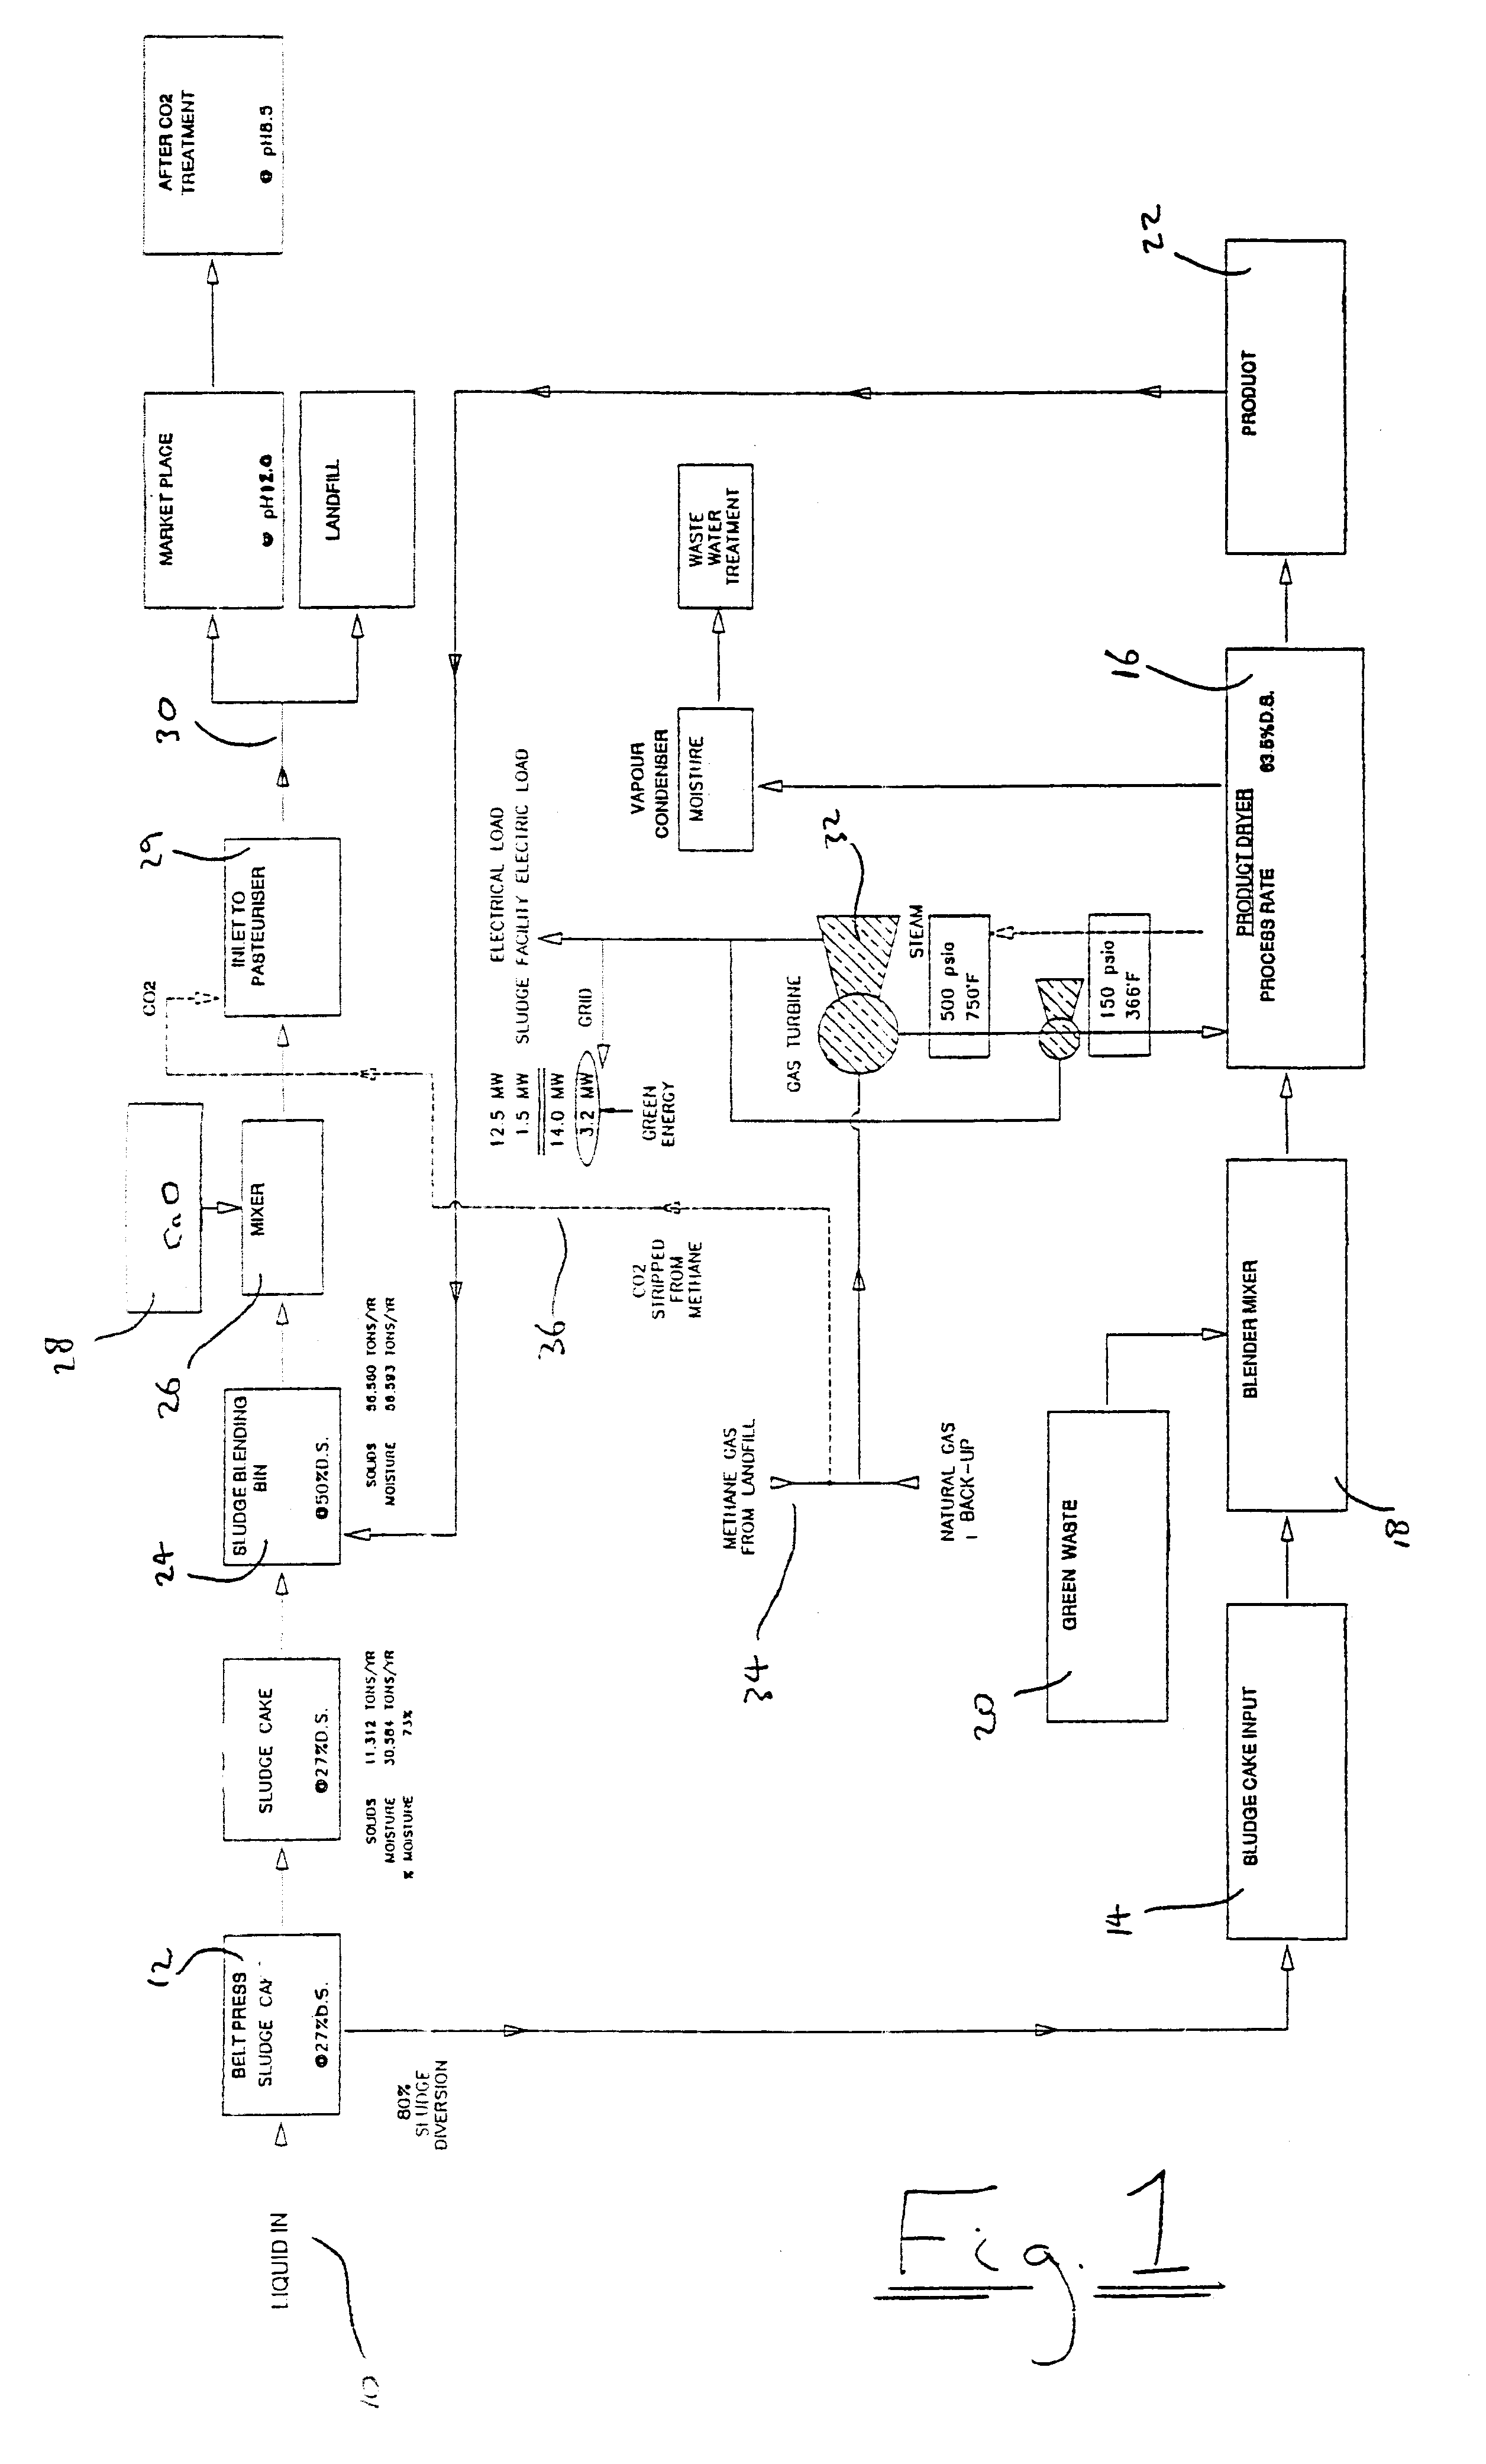 Processes and apparatus for treating sewage or like sludge